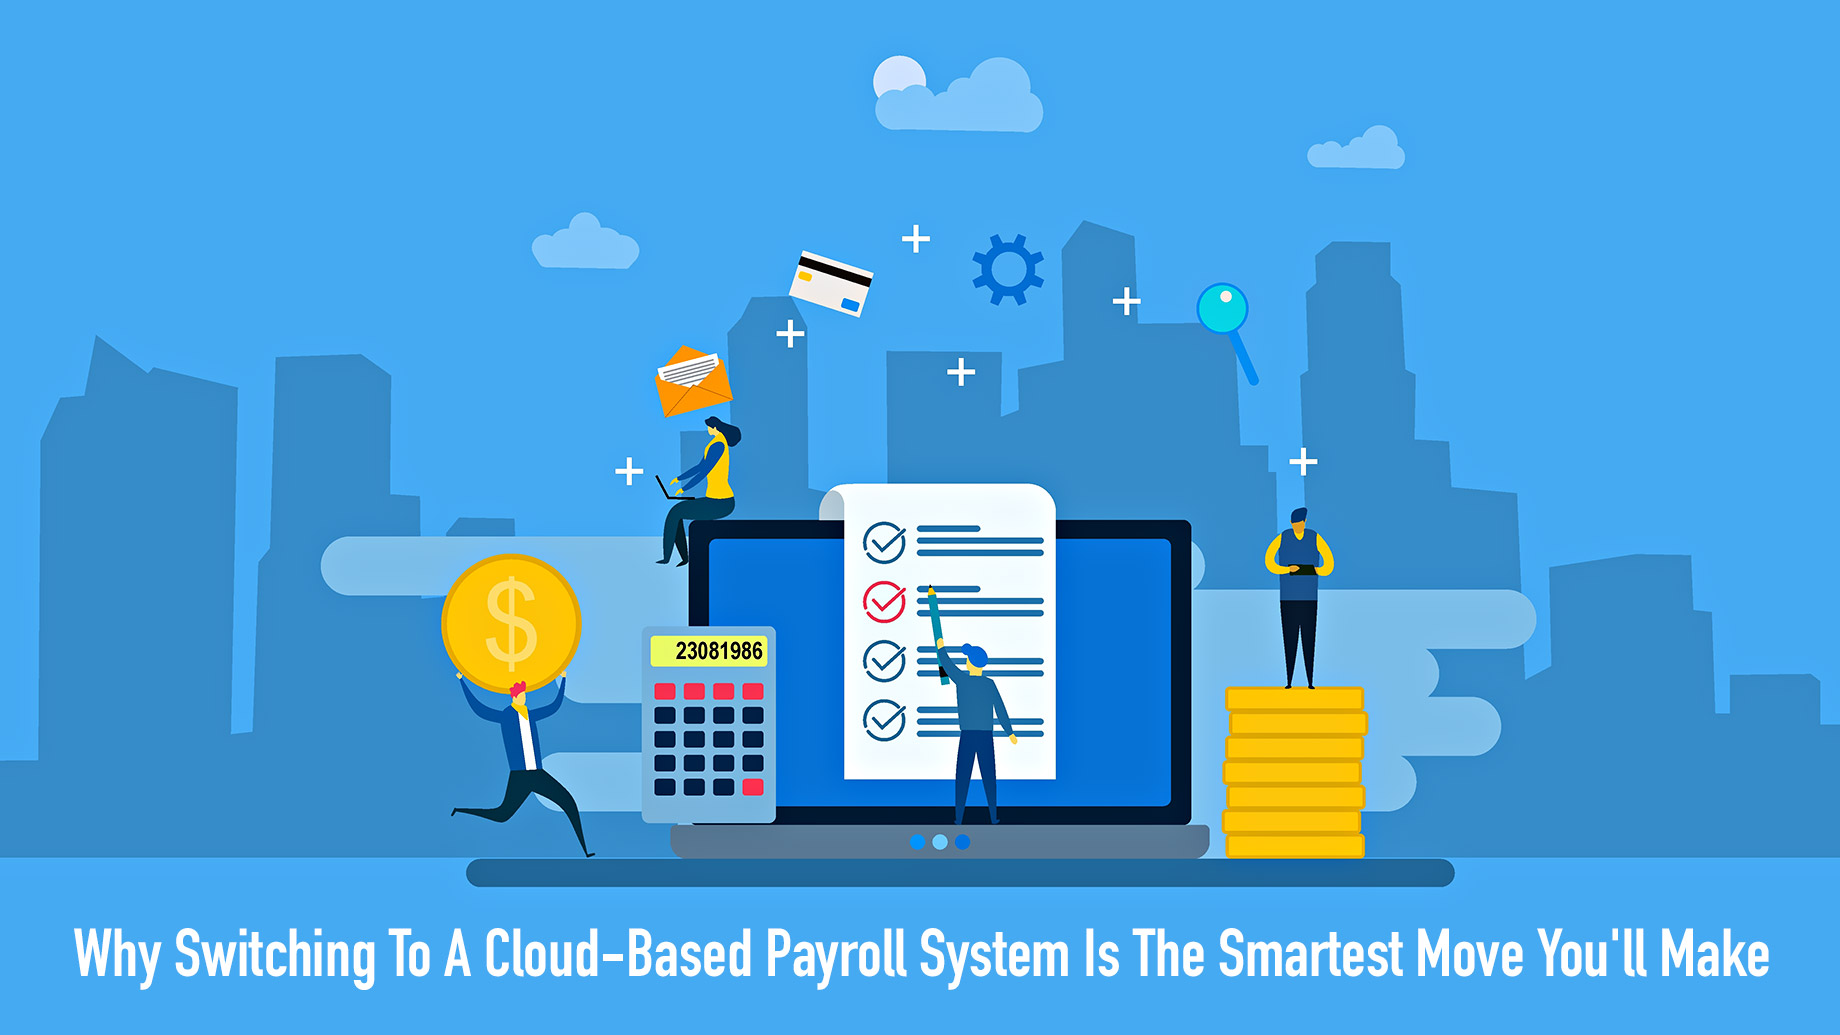 Why Switching To A Cloud-Based Payroll System Is The Smartest Move You'll Make